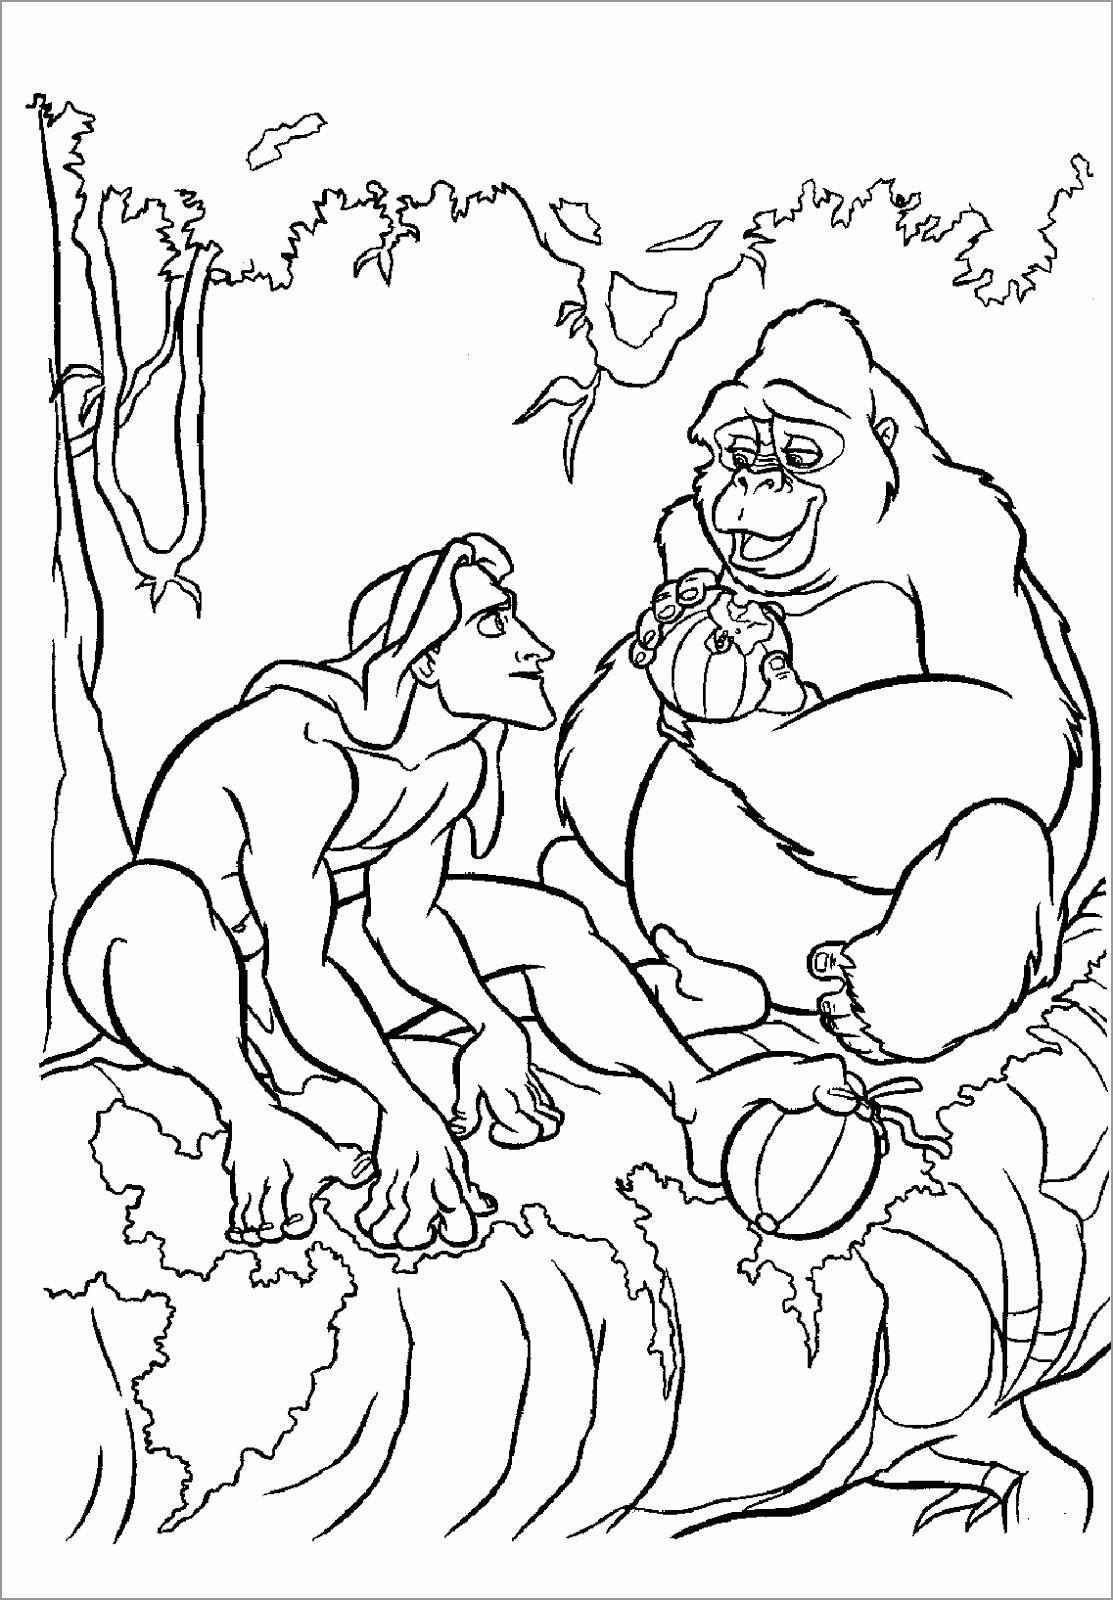 Tarzan and Apes Coloring Pages for Kids